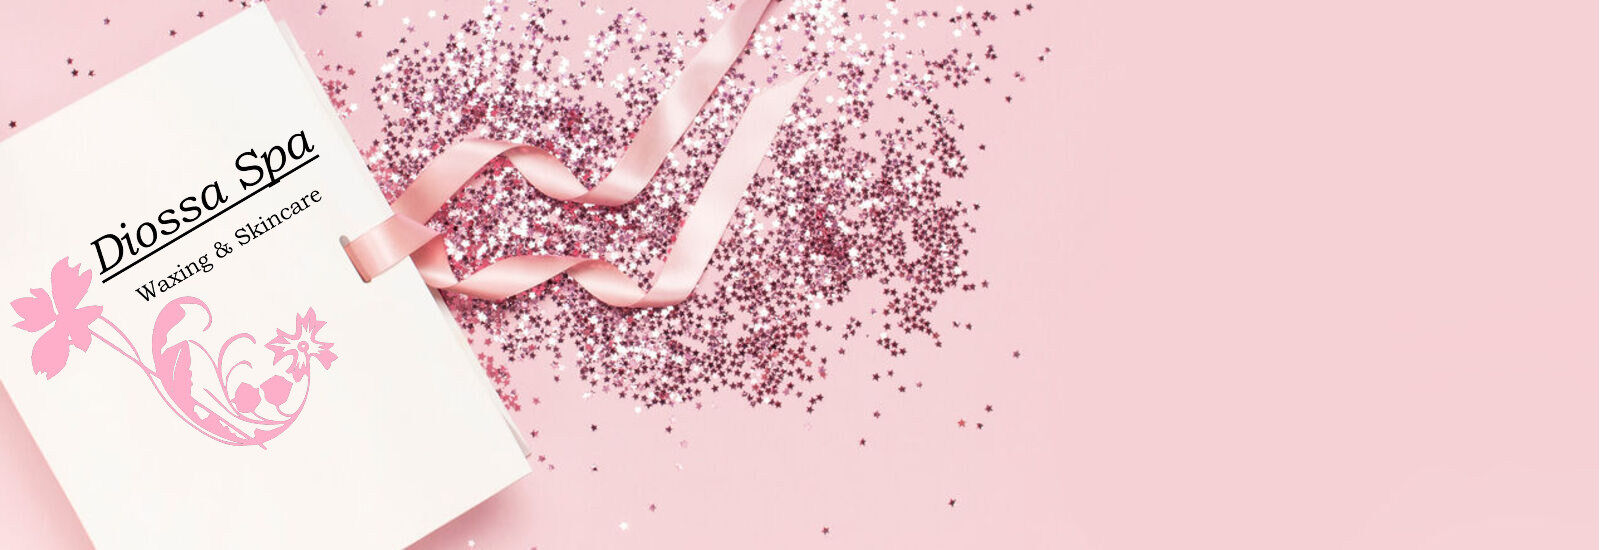 gift card surrounding by pink glitter on a pink background